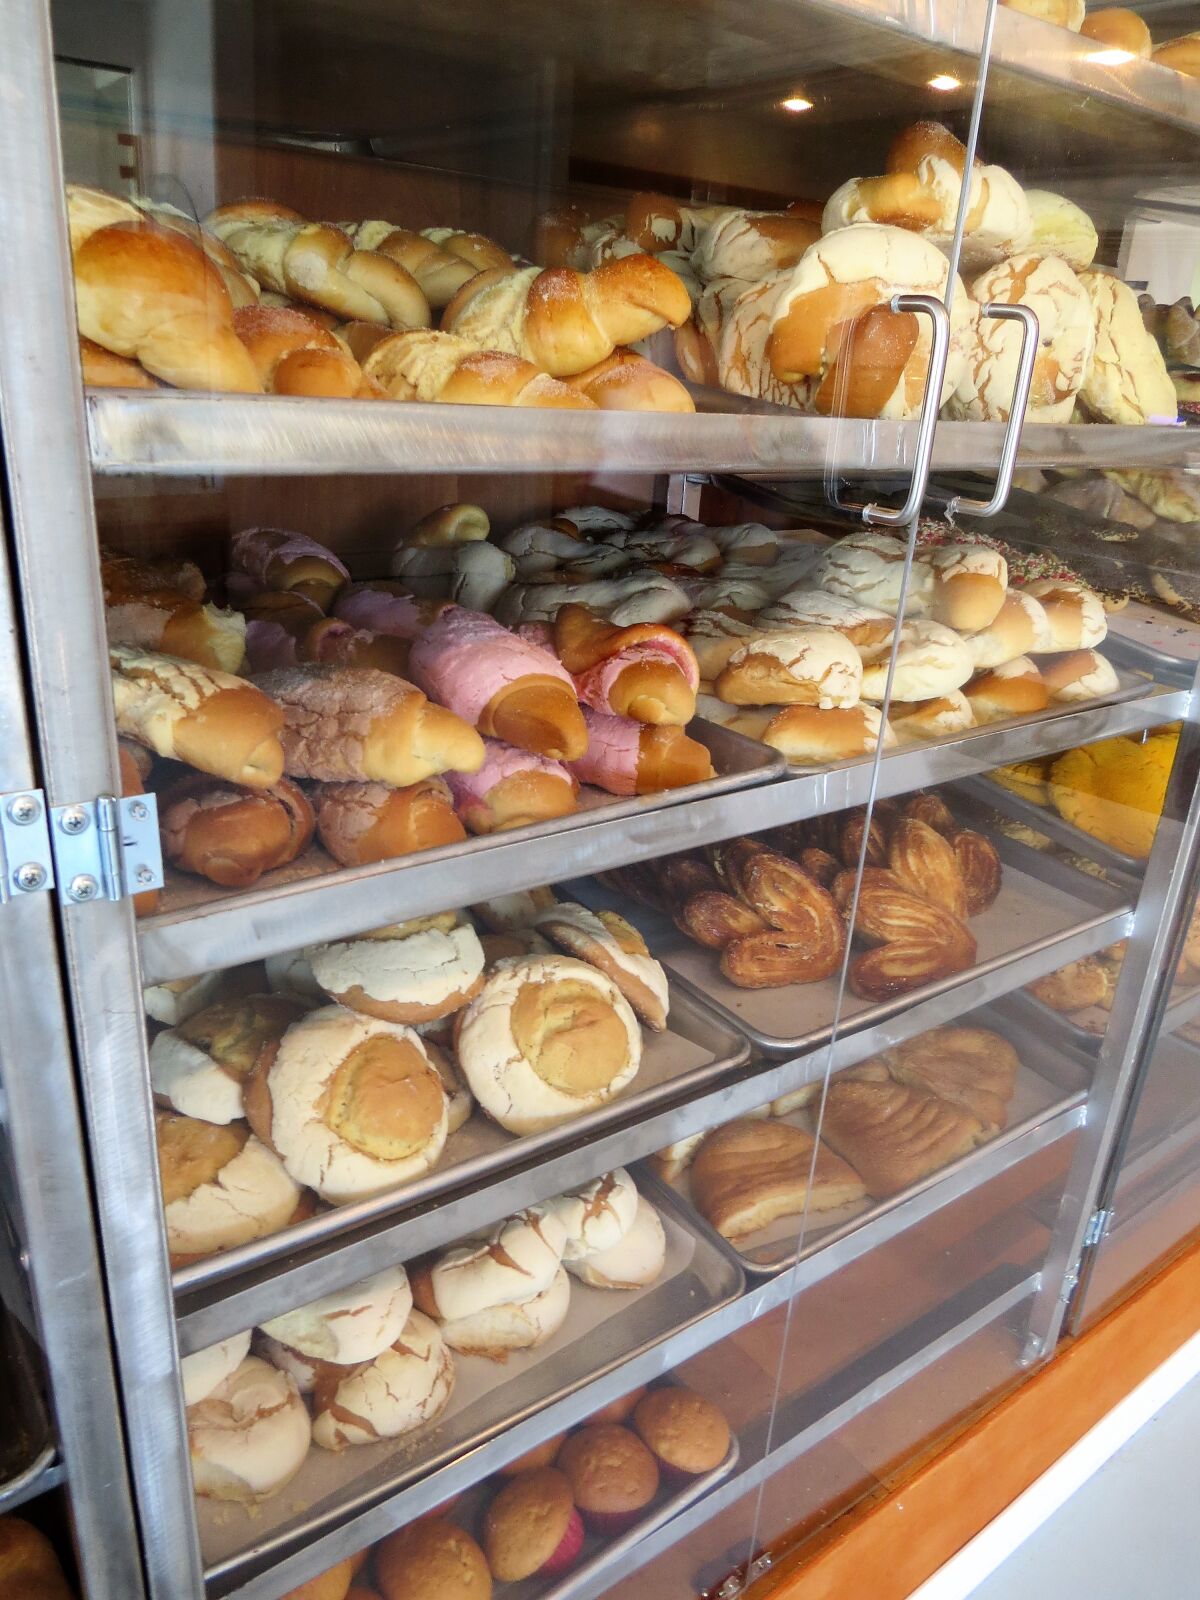 Customers can grab a tray and tongs and help themselves to a wide selection of Mexican pan dulce at Camila's Bakery in Escondido.